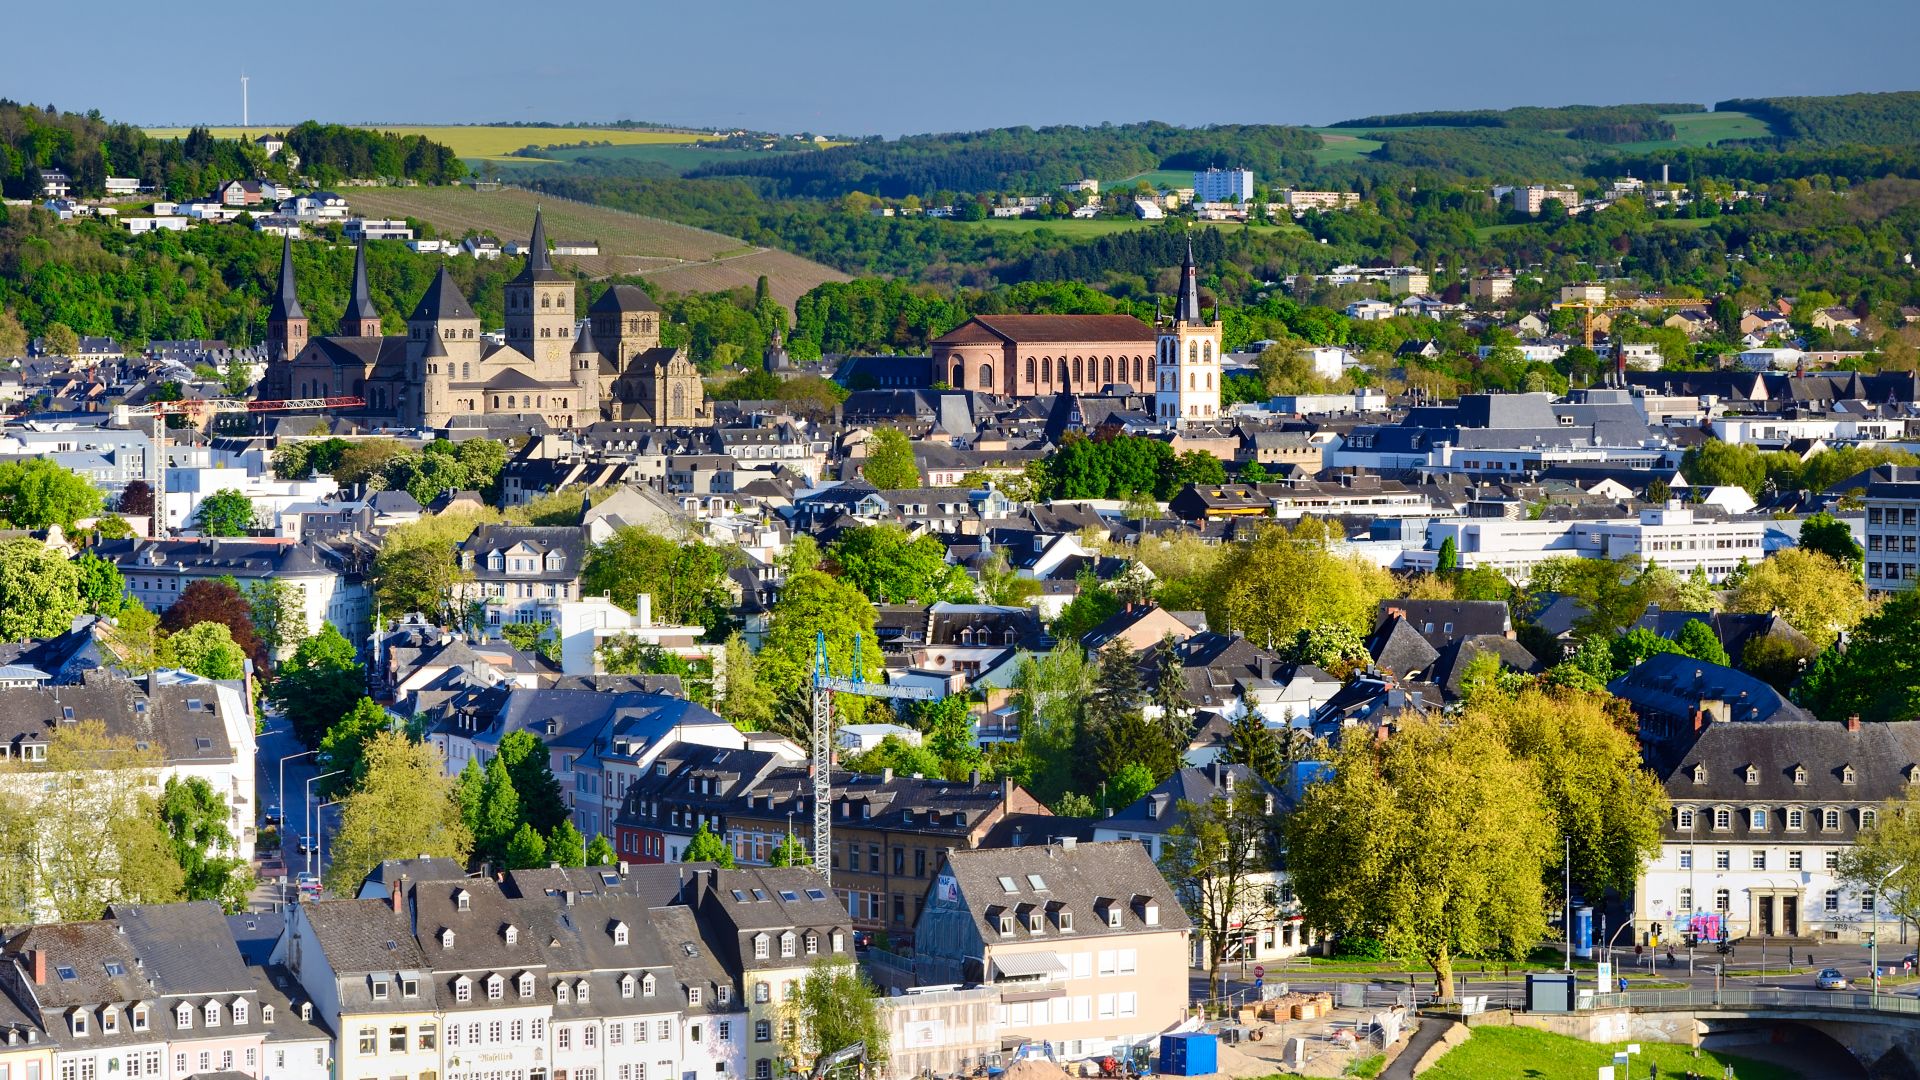 Trier: Moselle, cathedral and old town